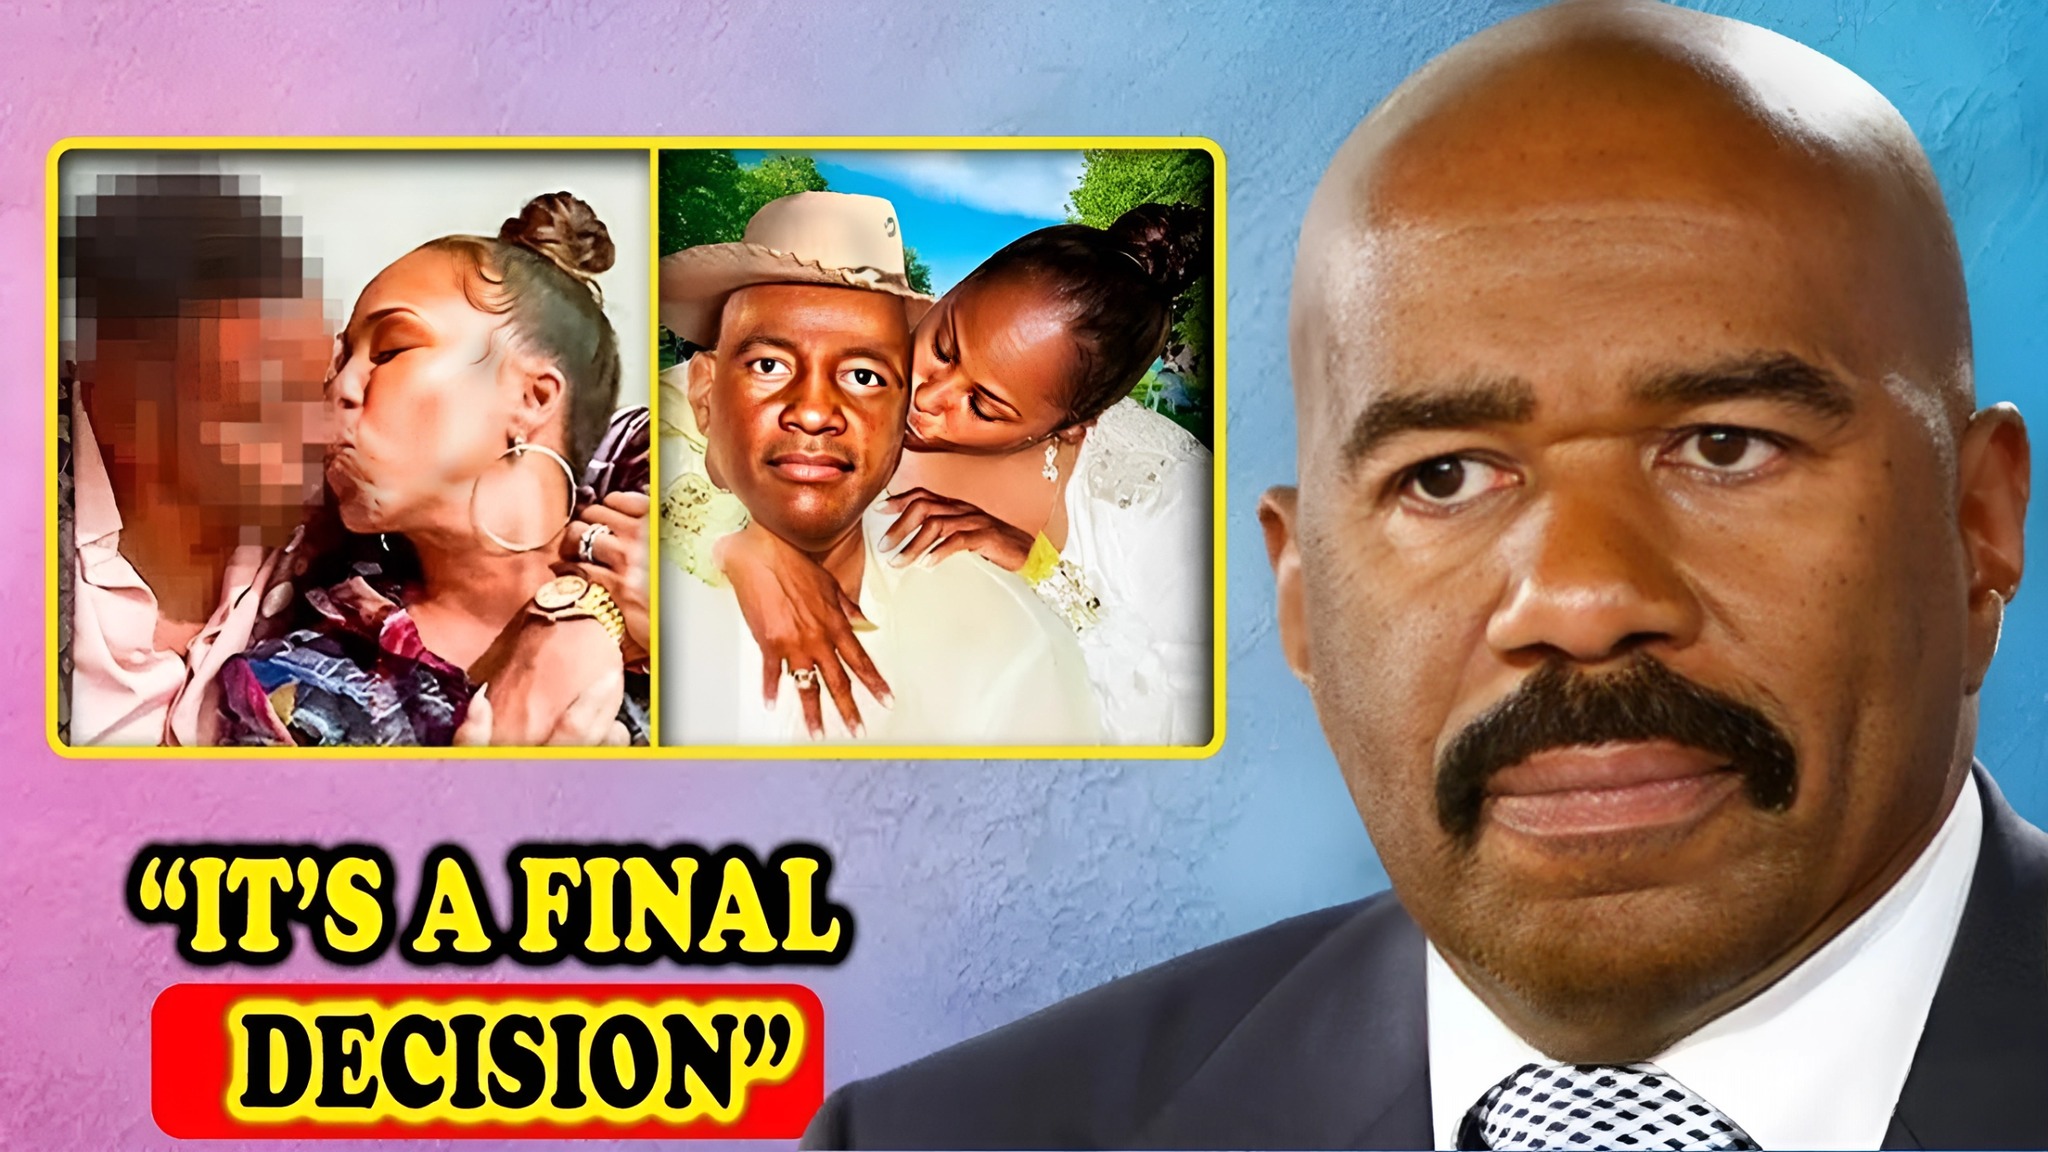 Steve Harvey Opens Up About Divorce Plans With Marjorie And Complex Property Split-Up